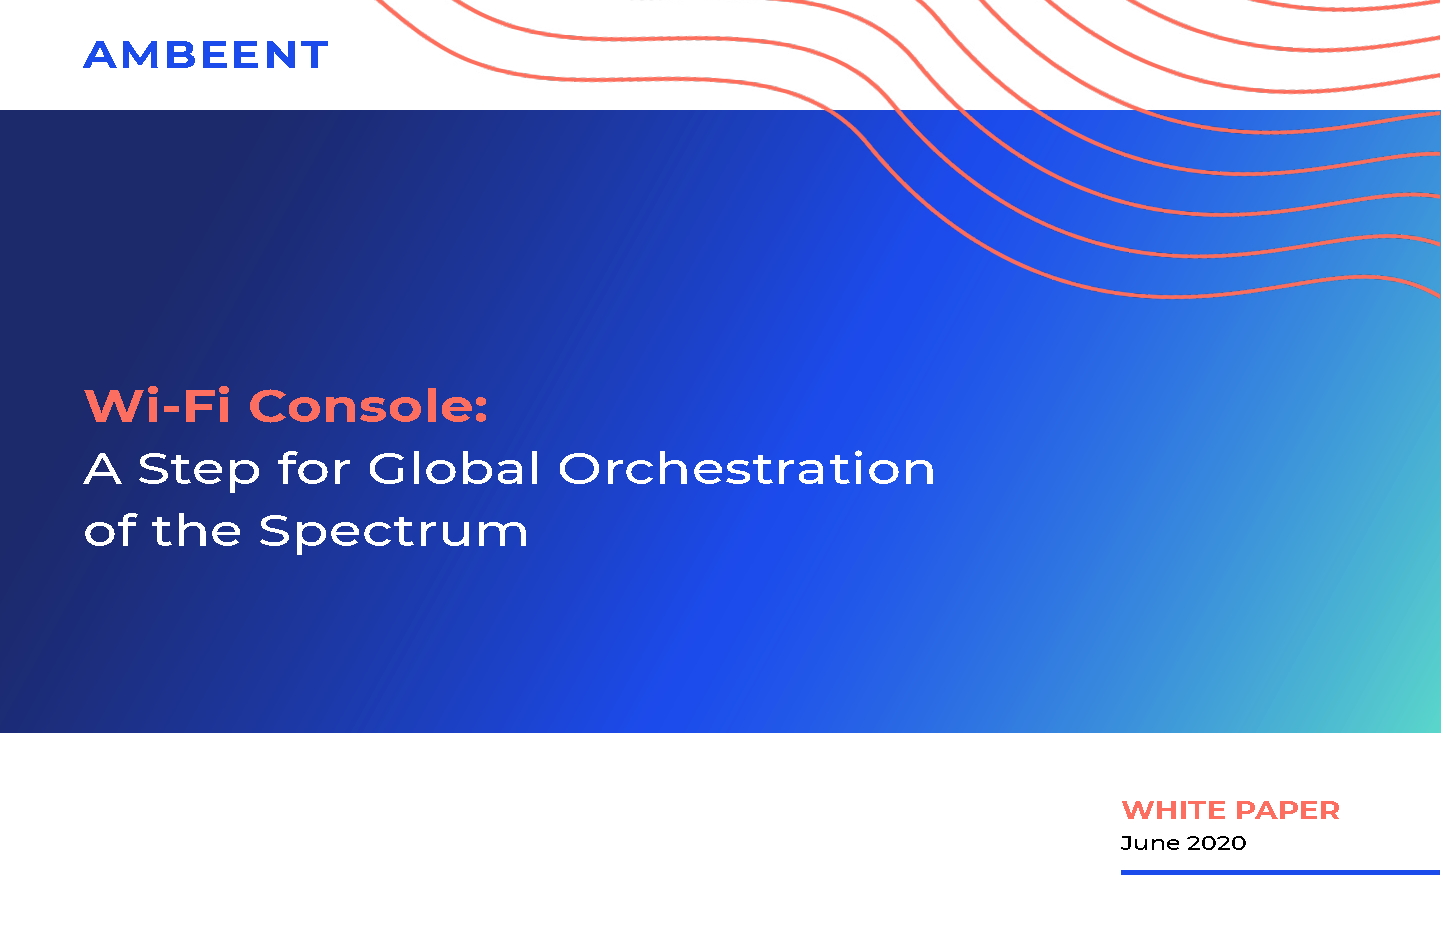 Wi-Fi Console: A Step for Global Orchestration of the Spectrum